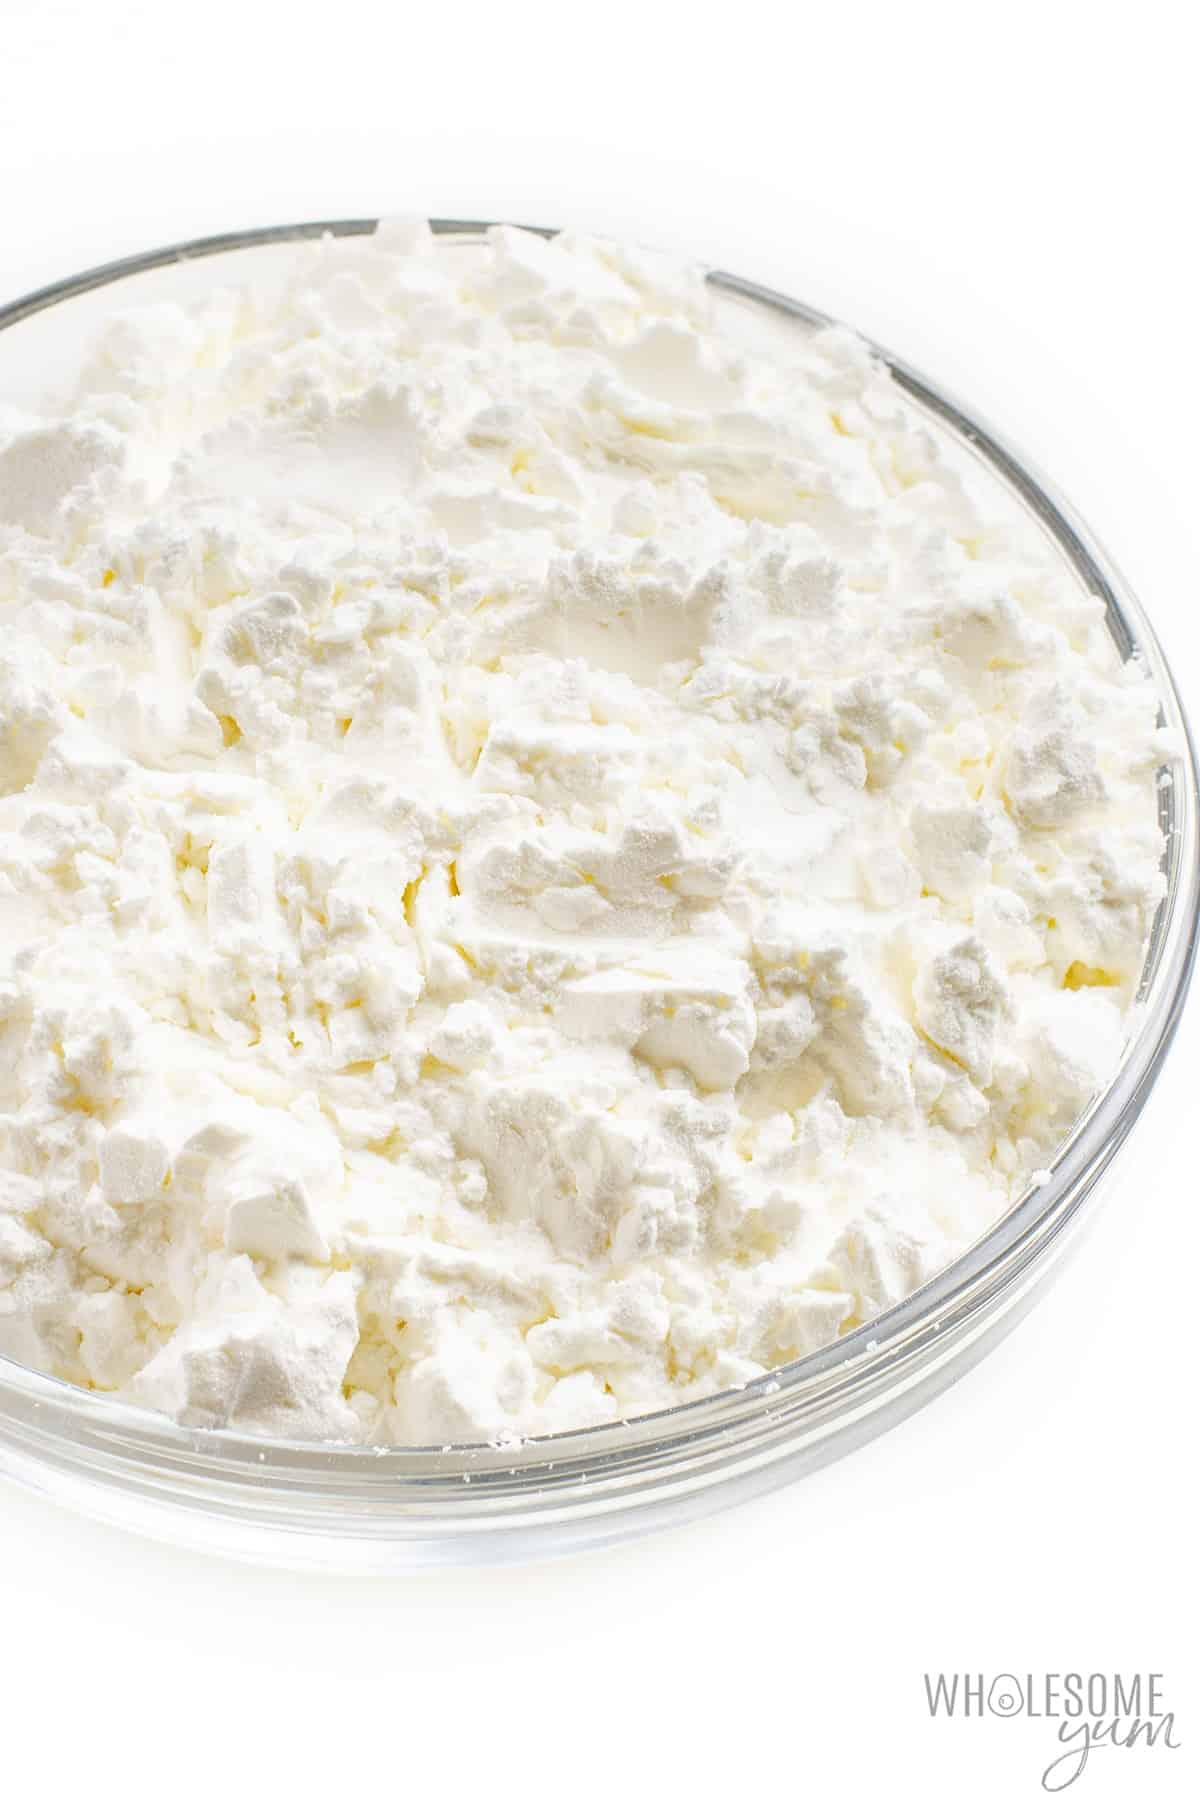 Is cornstarch keto? This bowl of cornstarch is too high in carbs to be keto friendly.